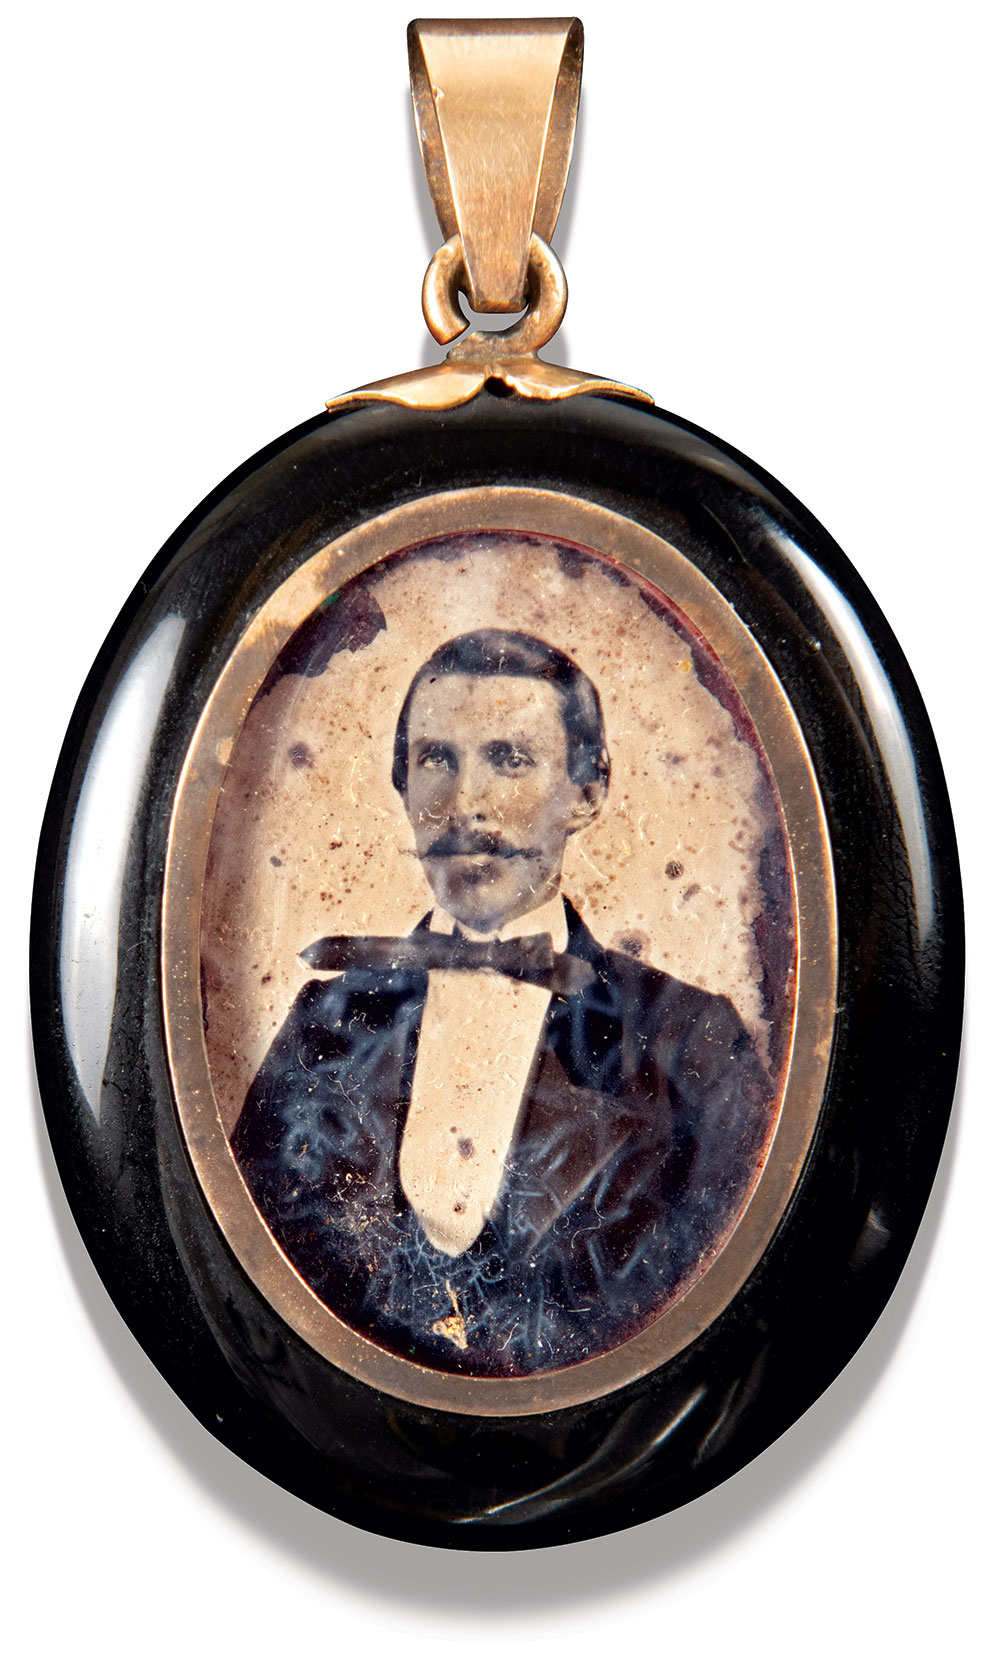 Earliest known portrait: This ambrotype of Semmes is housed in a small ebony oval pendant with a gold bezel and suspension loop, measuring approximately 2.5 x 1.5 inches. The image is dated circa 1857, at which time Semmes ranked as a U.S. Navy commander assigned to the Lighthouse Service as an inspector of Gulf Coast stations. He probably gave this portrait to his wife, Anne Elizabeth, to remember him while he was posted to distant locations. The Semmes family owned the portrait until the 1970s when it was obtained by antiques dealer Gary Hendershott and sold to the History Museum of Mobile, where it is displayed in the Raphael Semmes Gallery. Ambrotype by an unidentified photographer. Collection of the History Museum of Mobile; Photo by Jeff Tesney/Mobile, Ala.